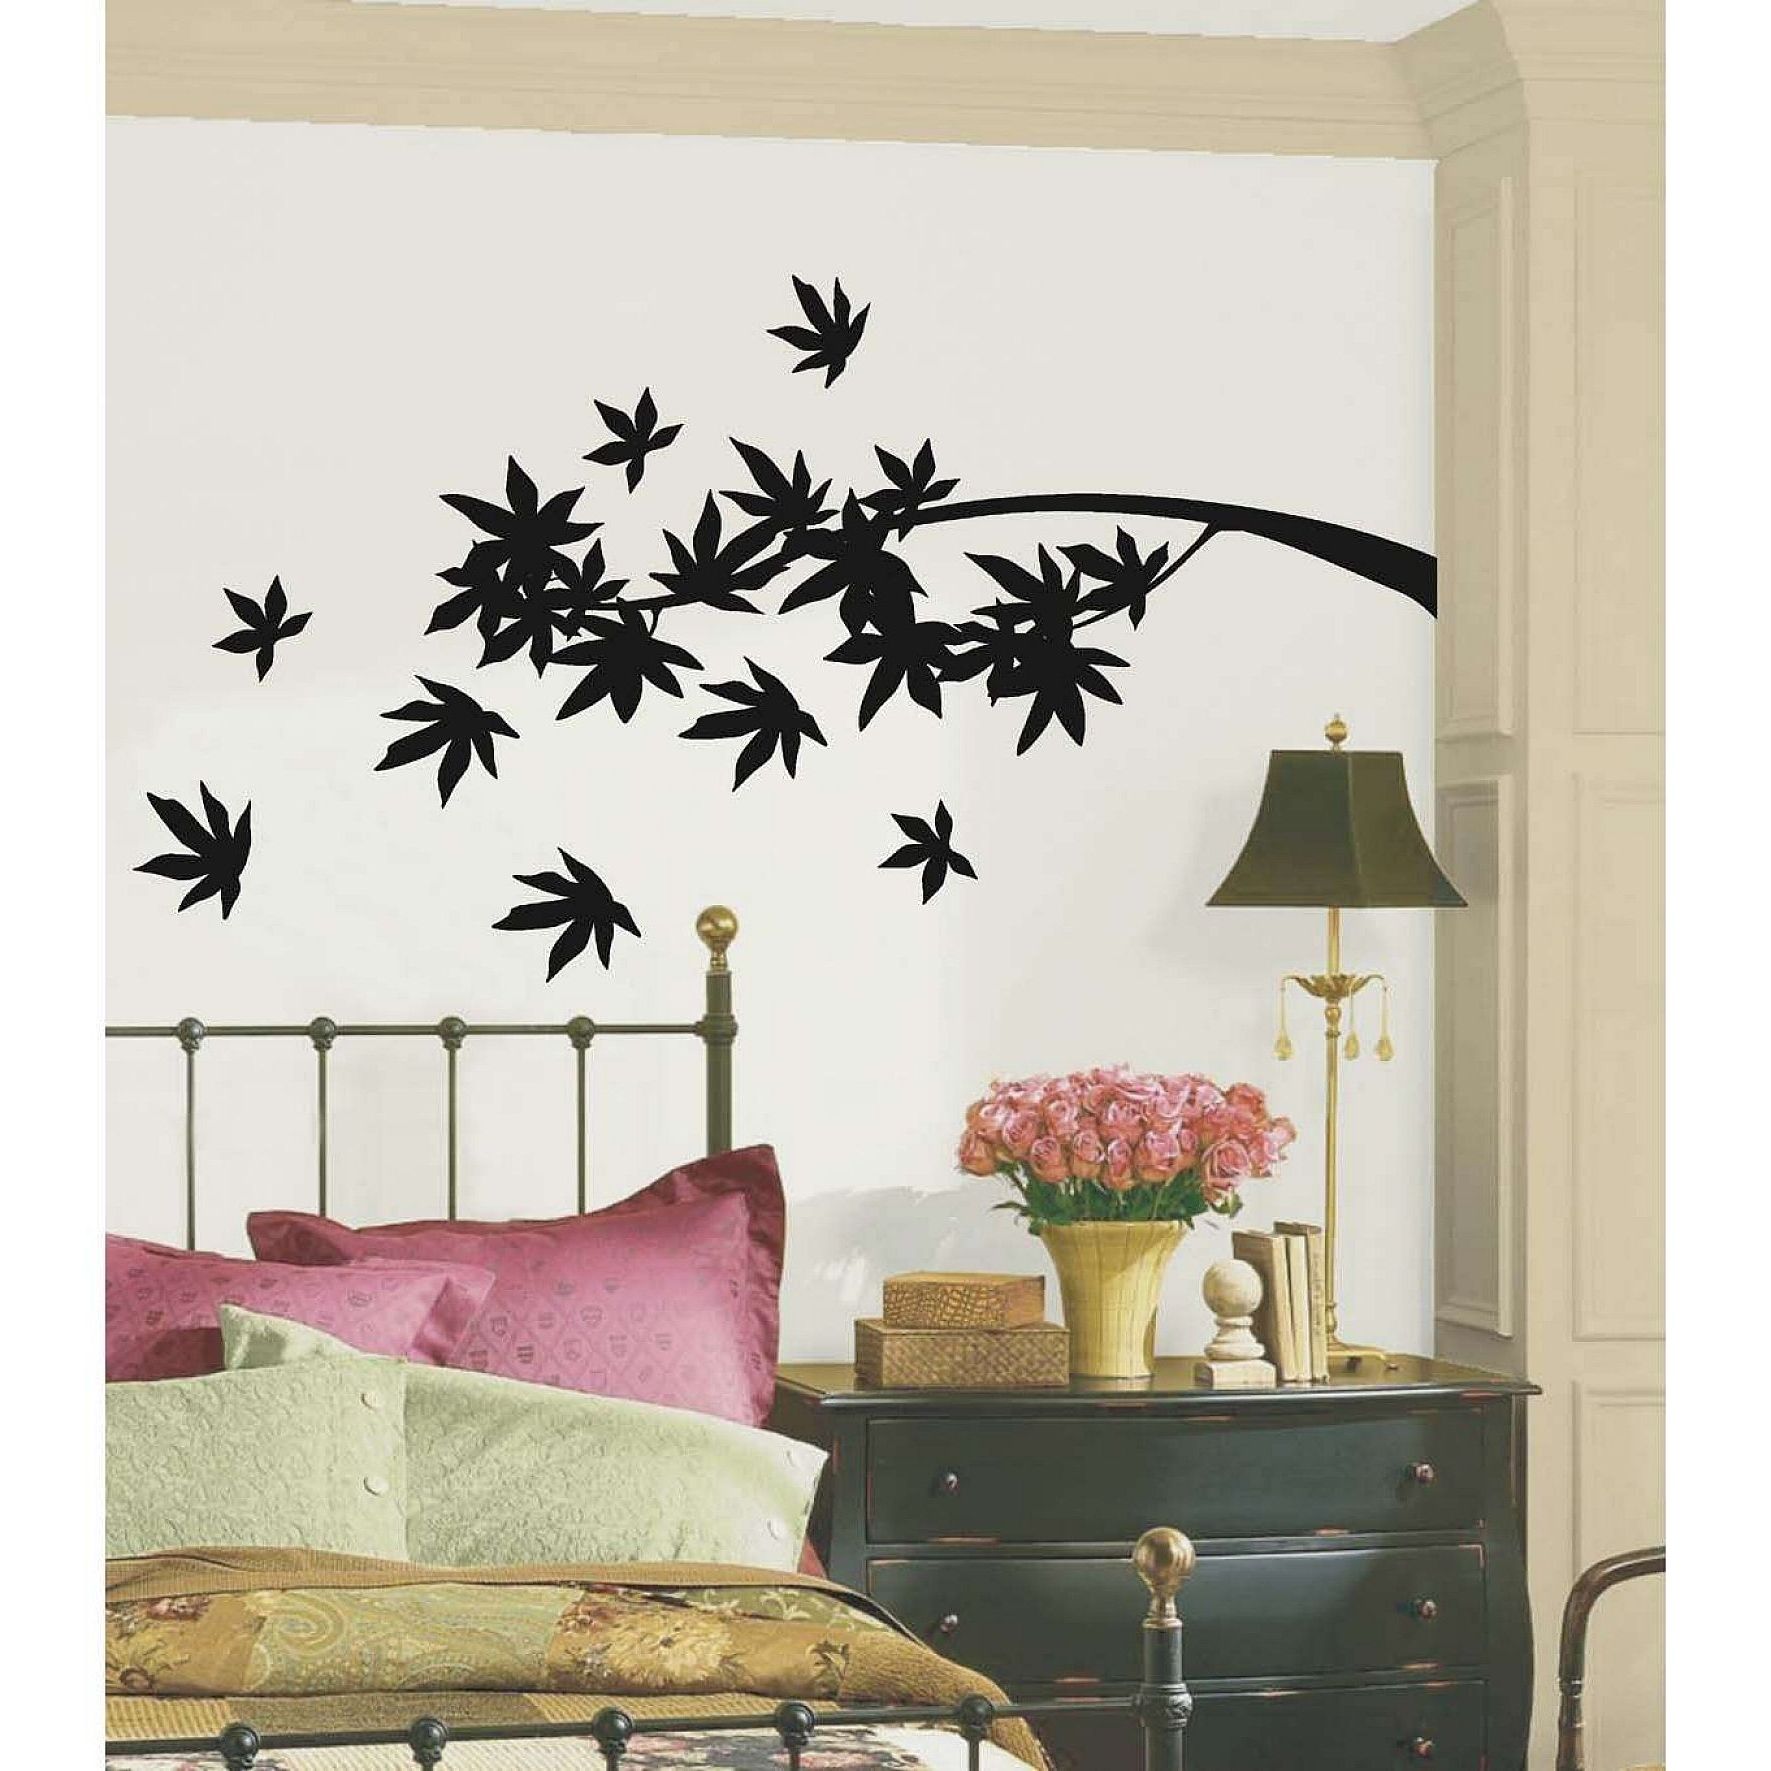 Removable Wall Accents Pertaining To 2018 Wall Decor : Decorative Wall Decals Butterfly Wall Decals Wall Art (View 9 of 15)